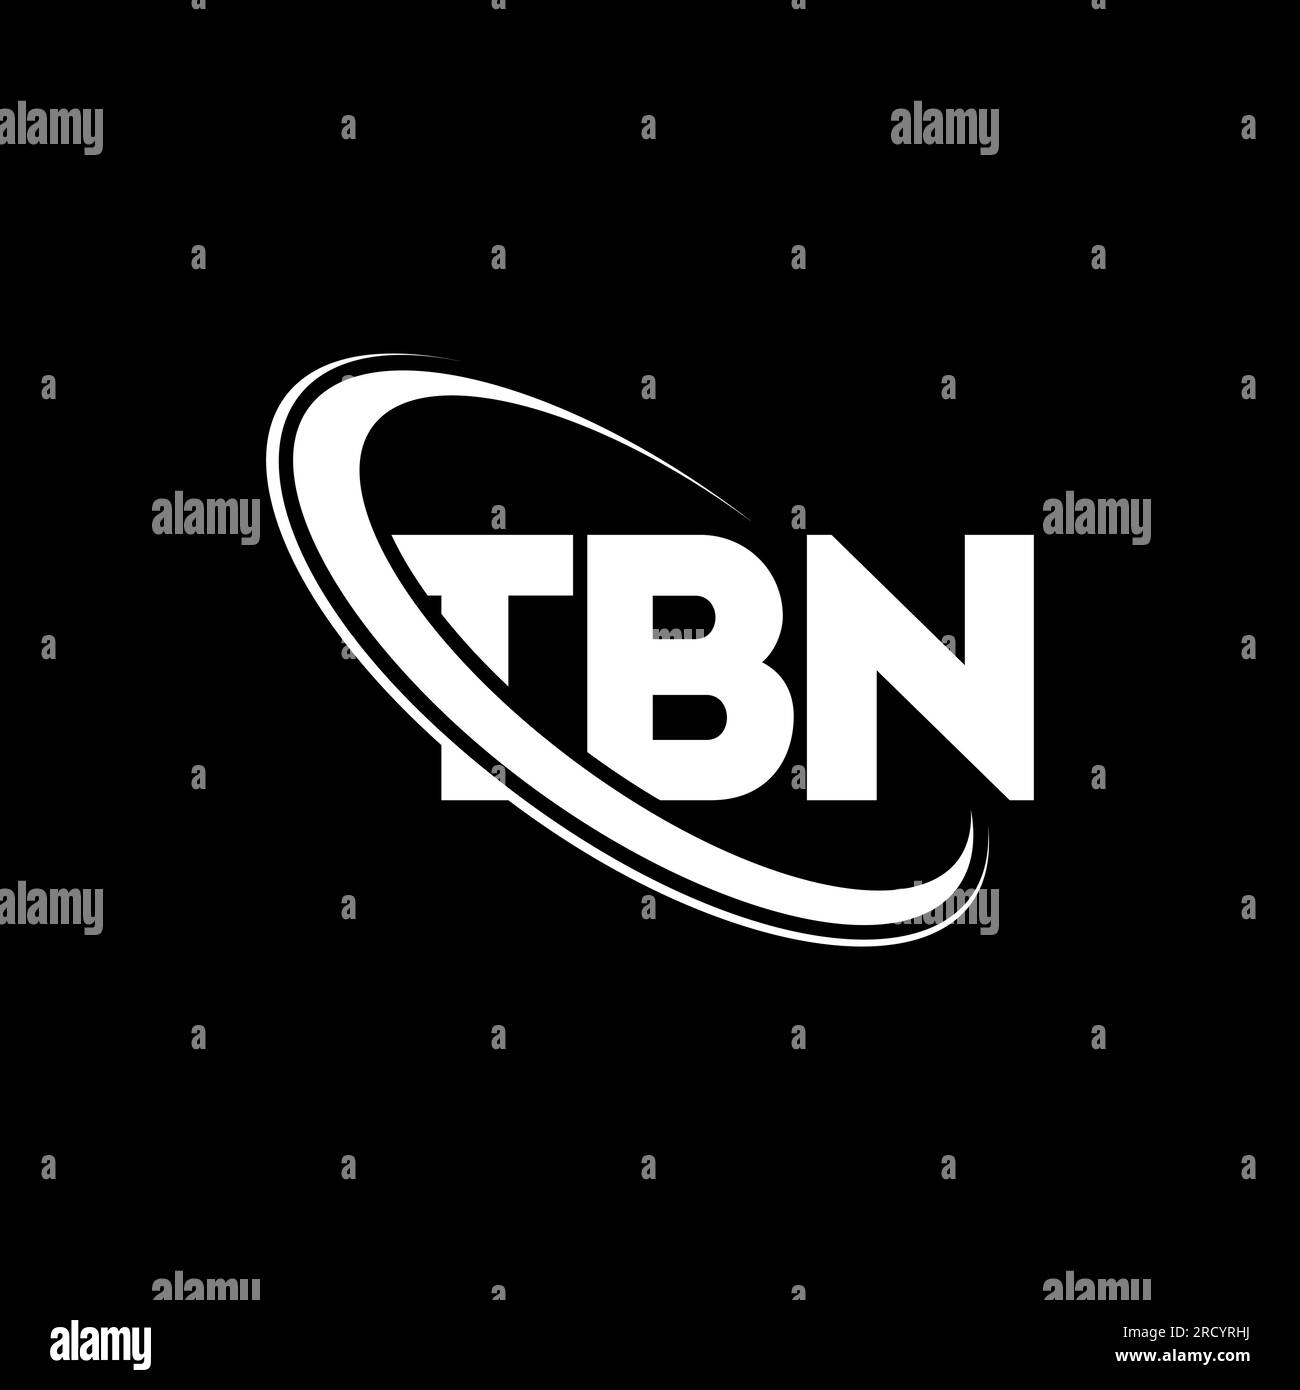 TBN logo. TBN letter. TBN letter logo design. Initials TBN logo linked with circle and uppercase monogram logo. TBN typography for technology, busines Stock Vector